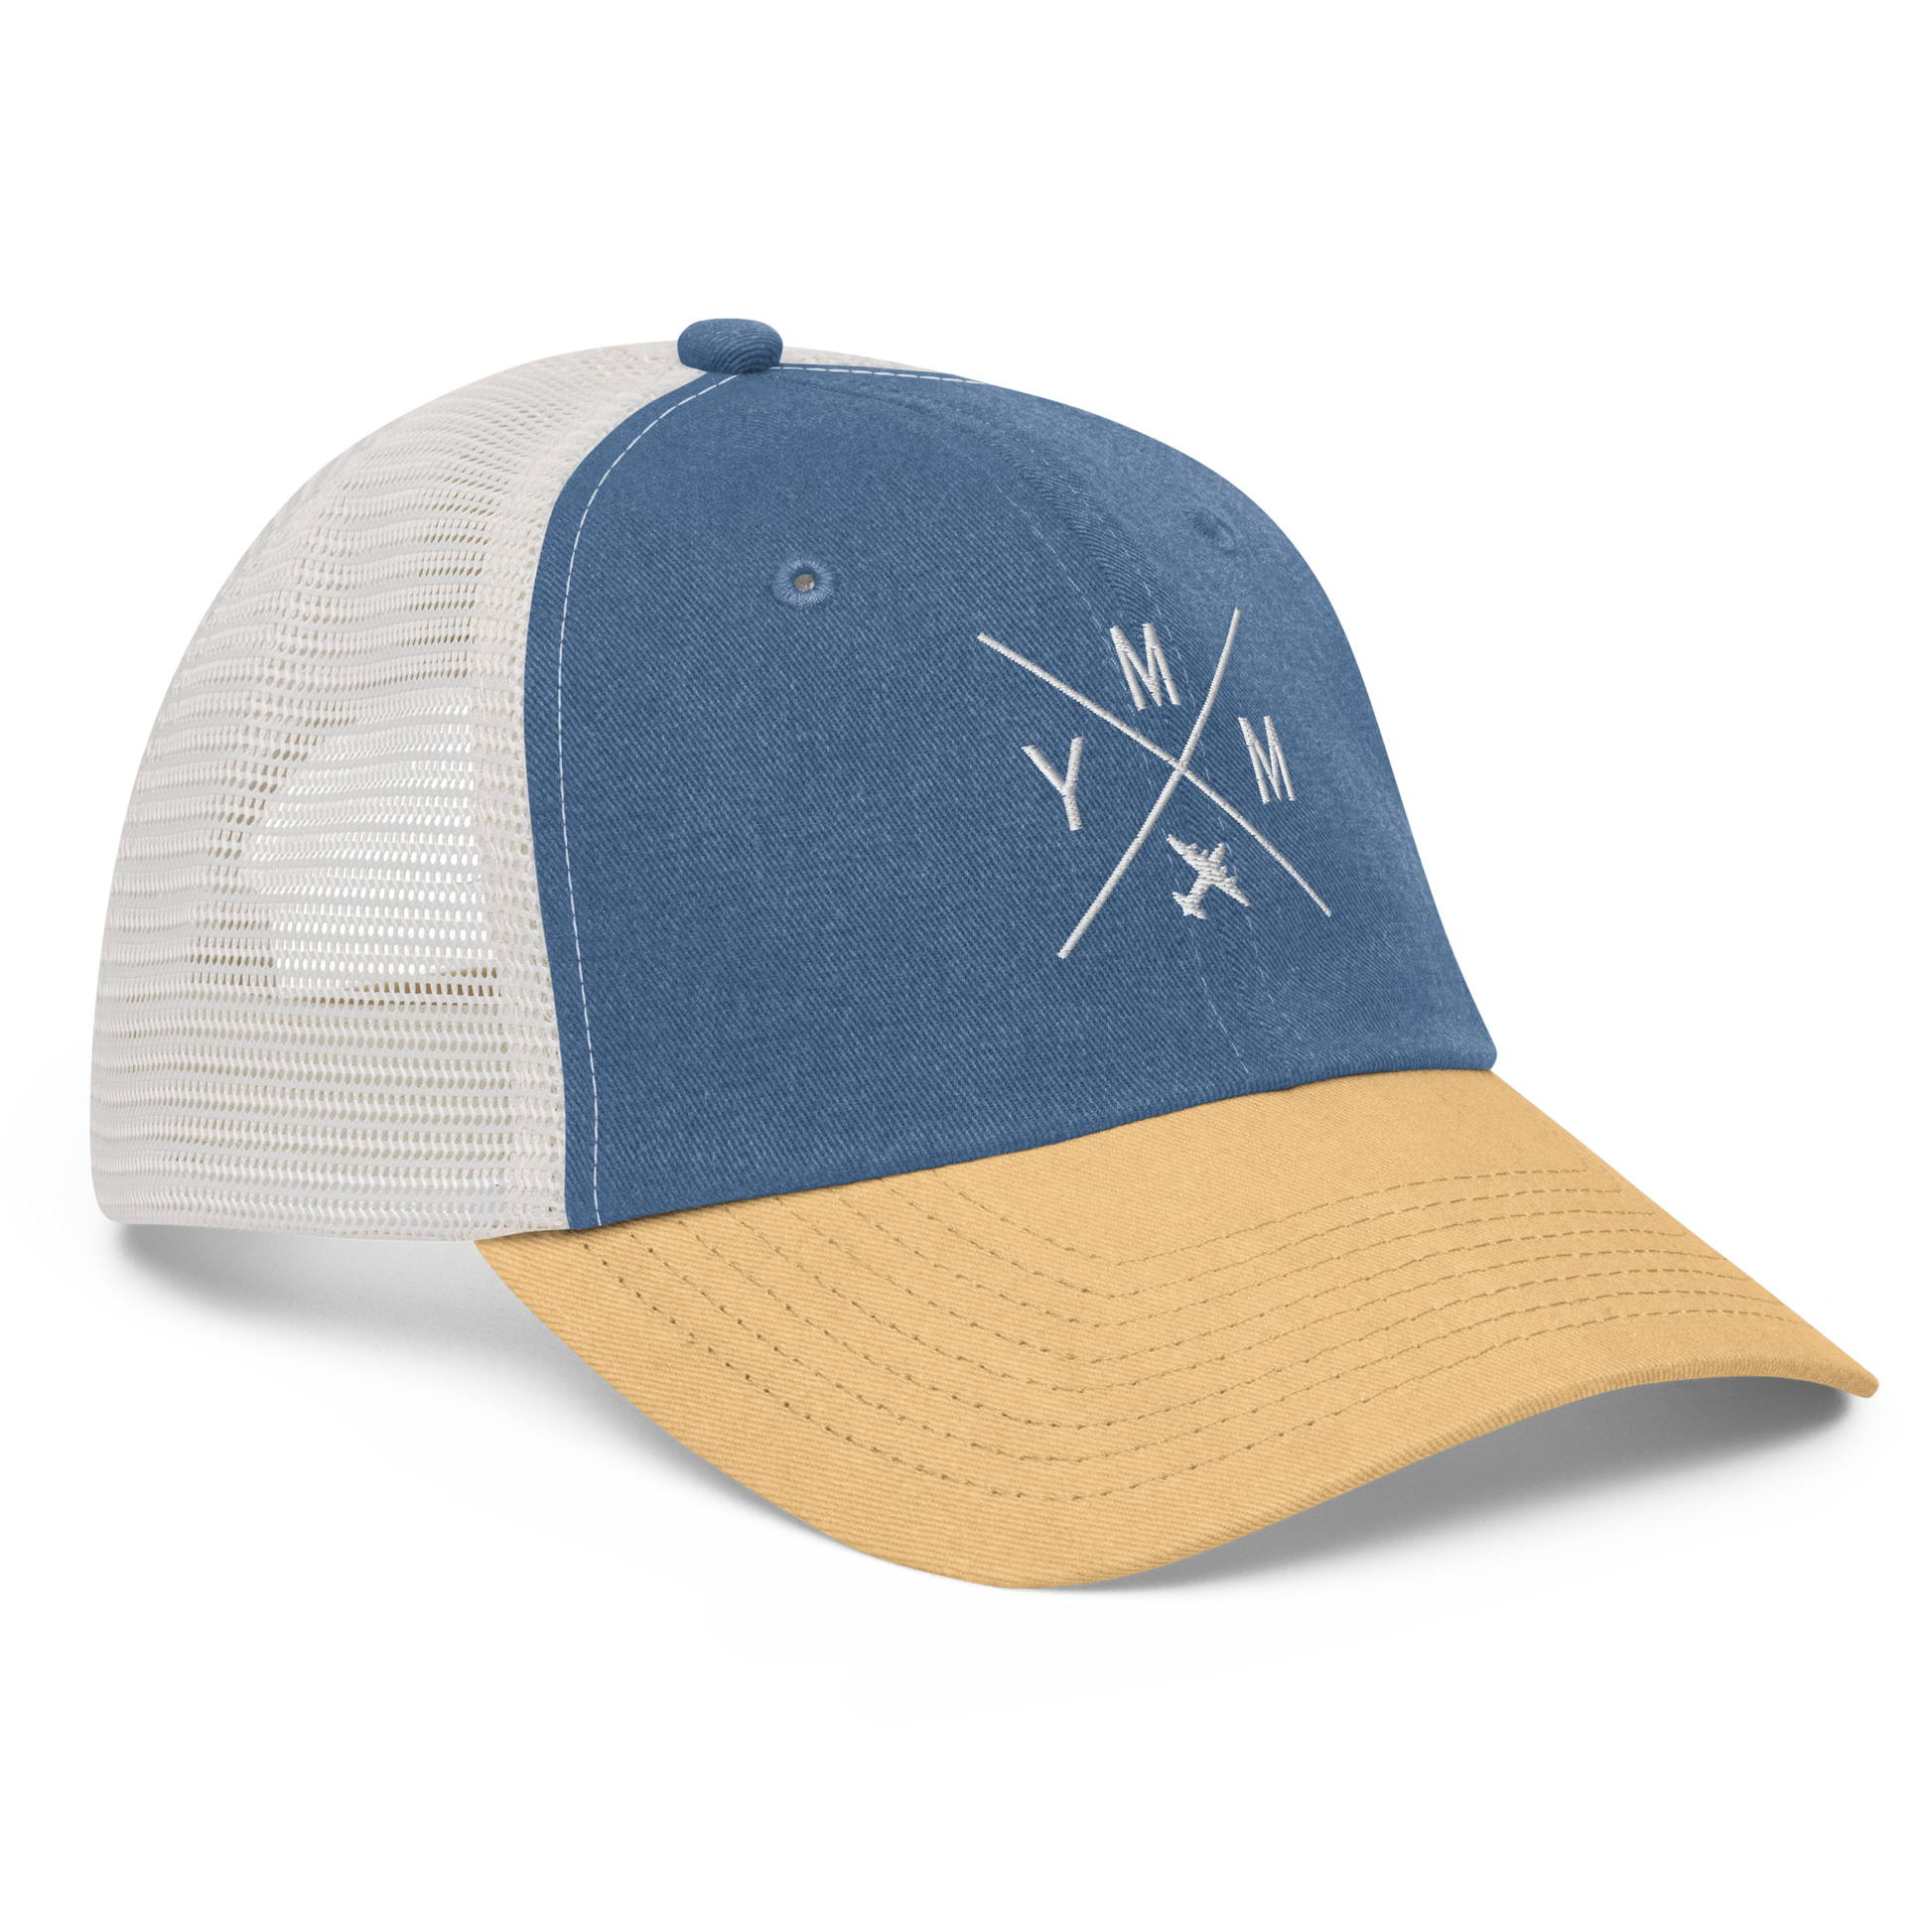 Crossed-X Pigment-Dyed Trucker Cap • YMM Fort McMurray • YHM Designs - Image 18